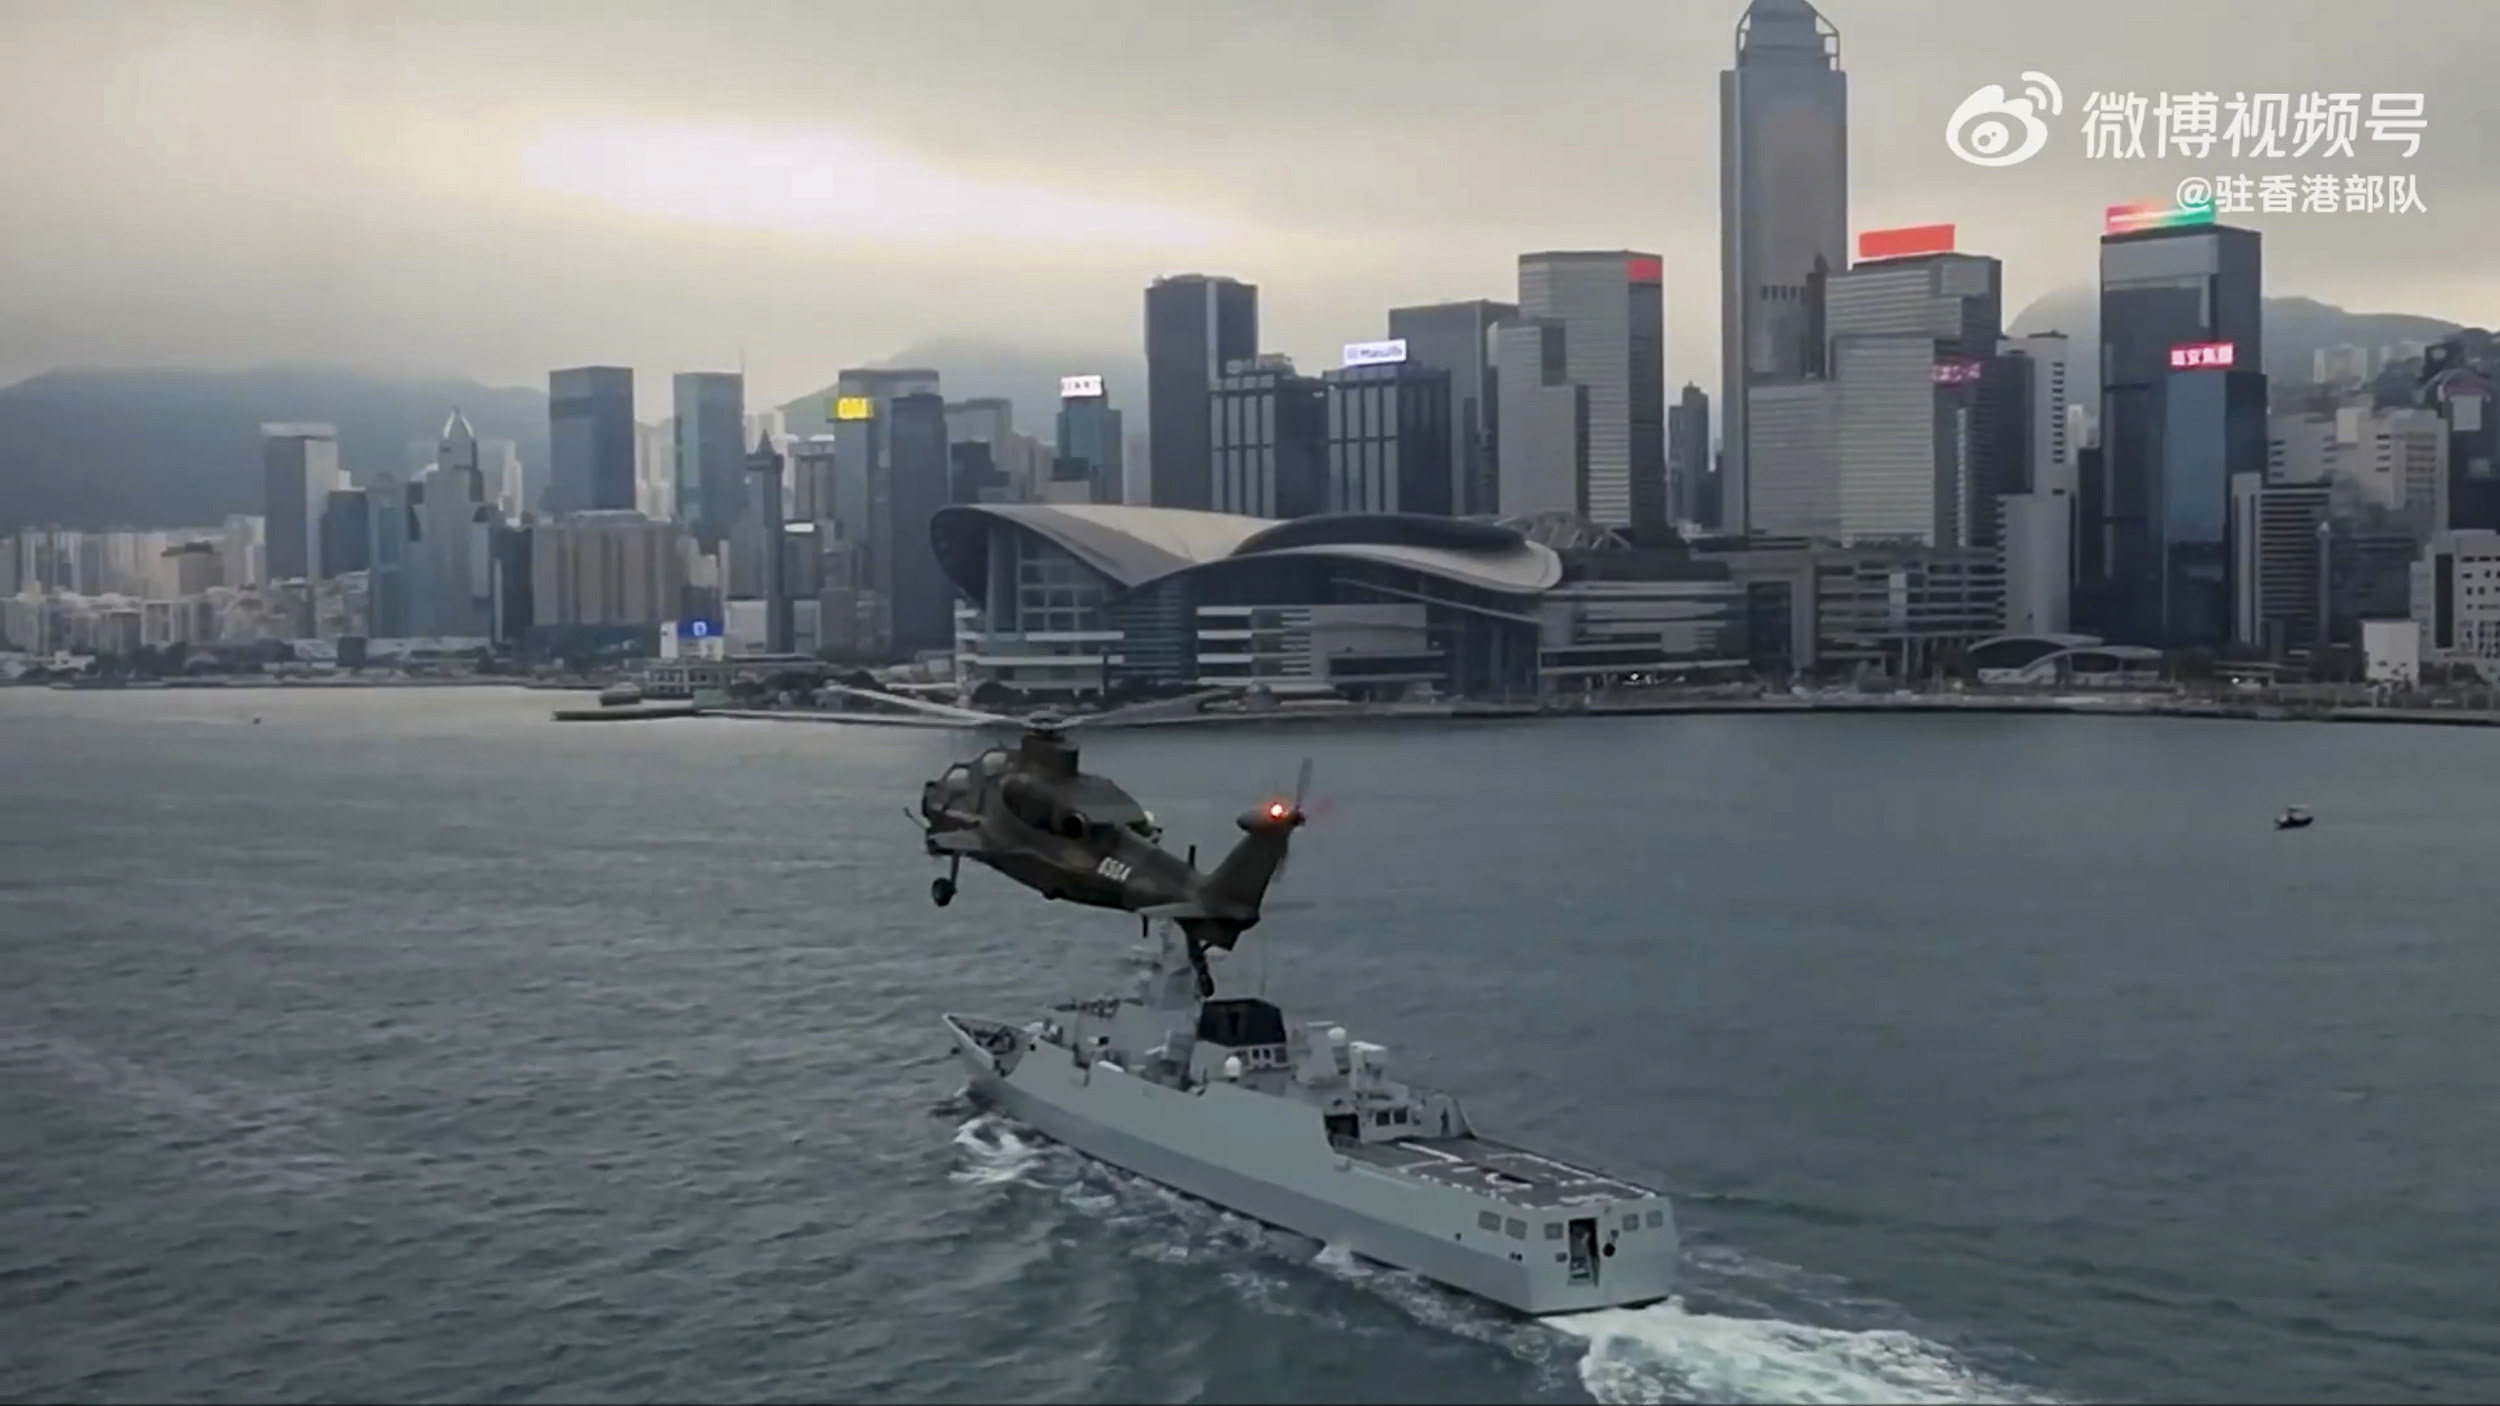 A helicopter and warship pass in front of the Hong Kong Exhibition and Convention Centre. Photo: Weibo